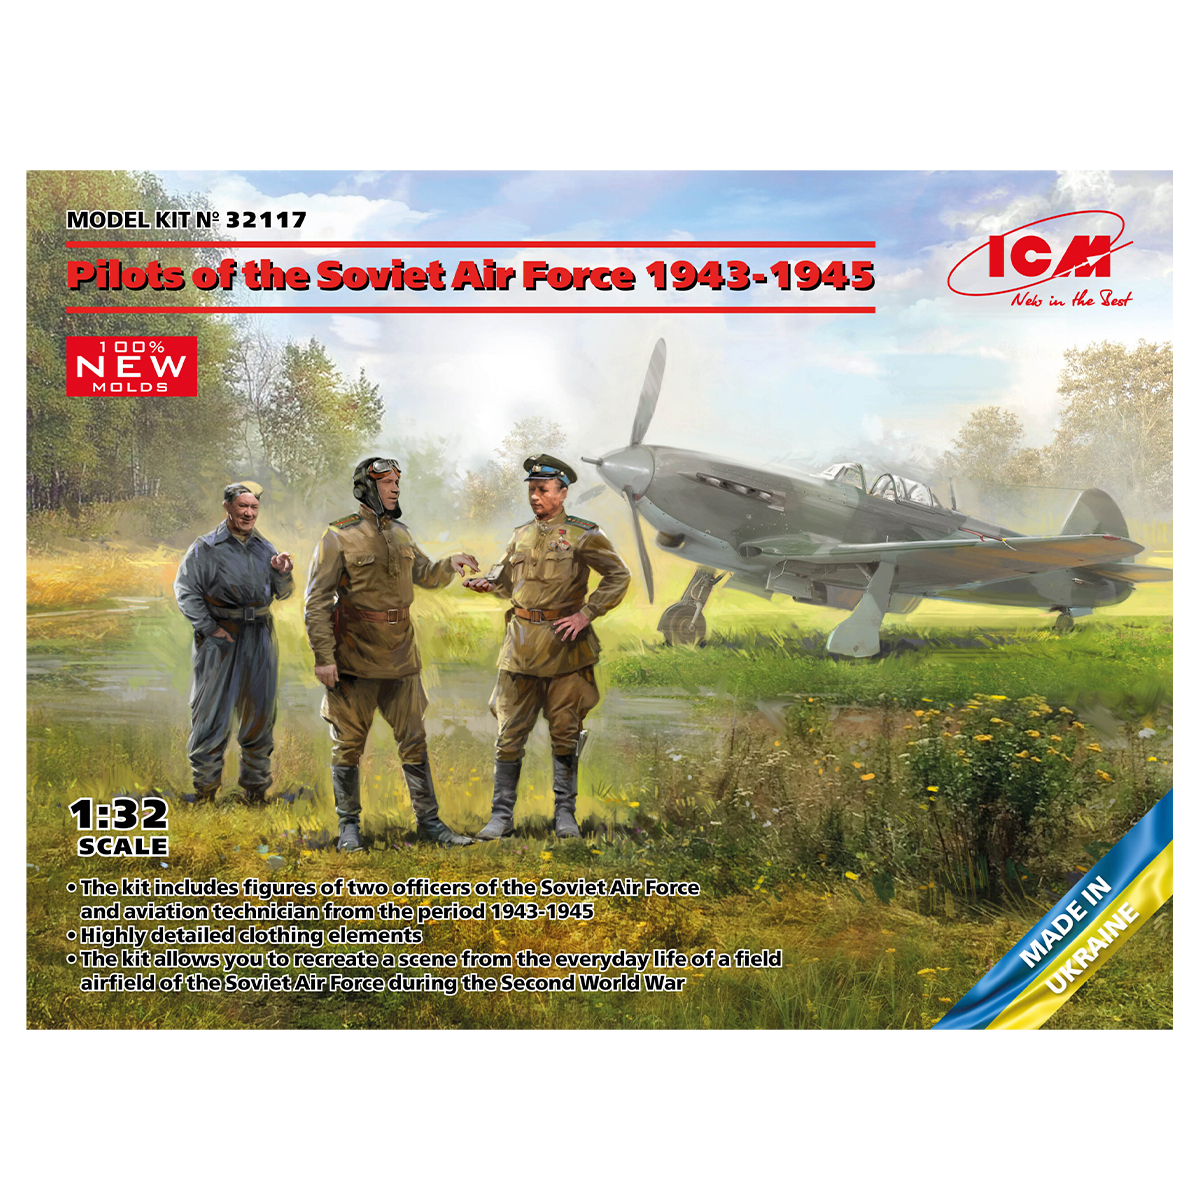 Pilots of the Soviet Air Force 1943-1945 (100% new molds) 1/32